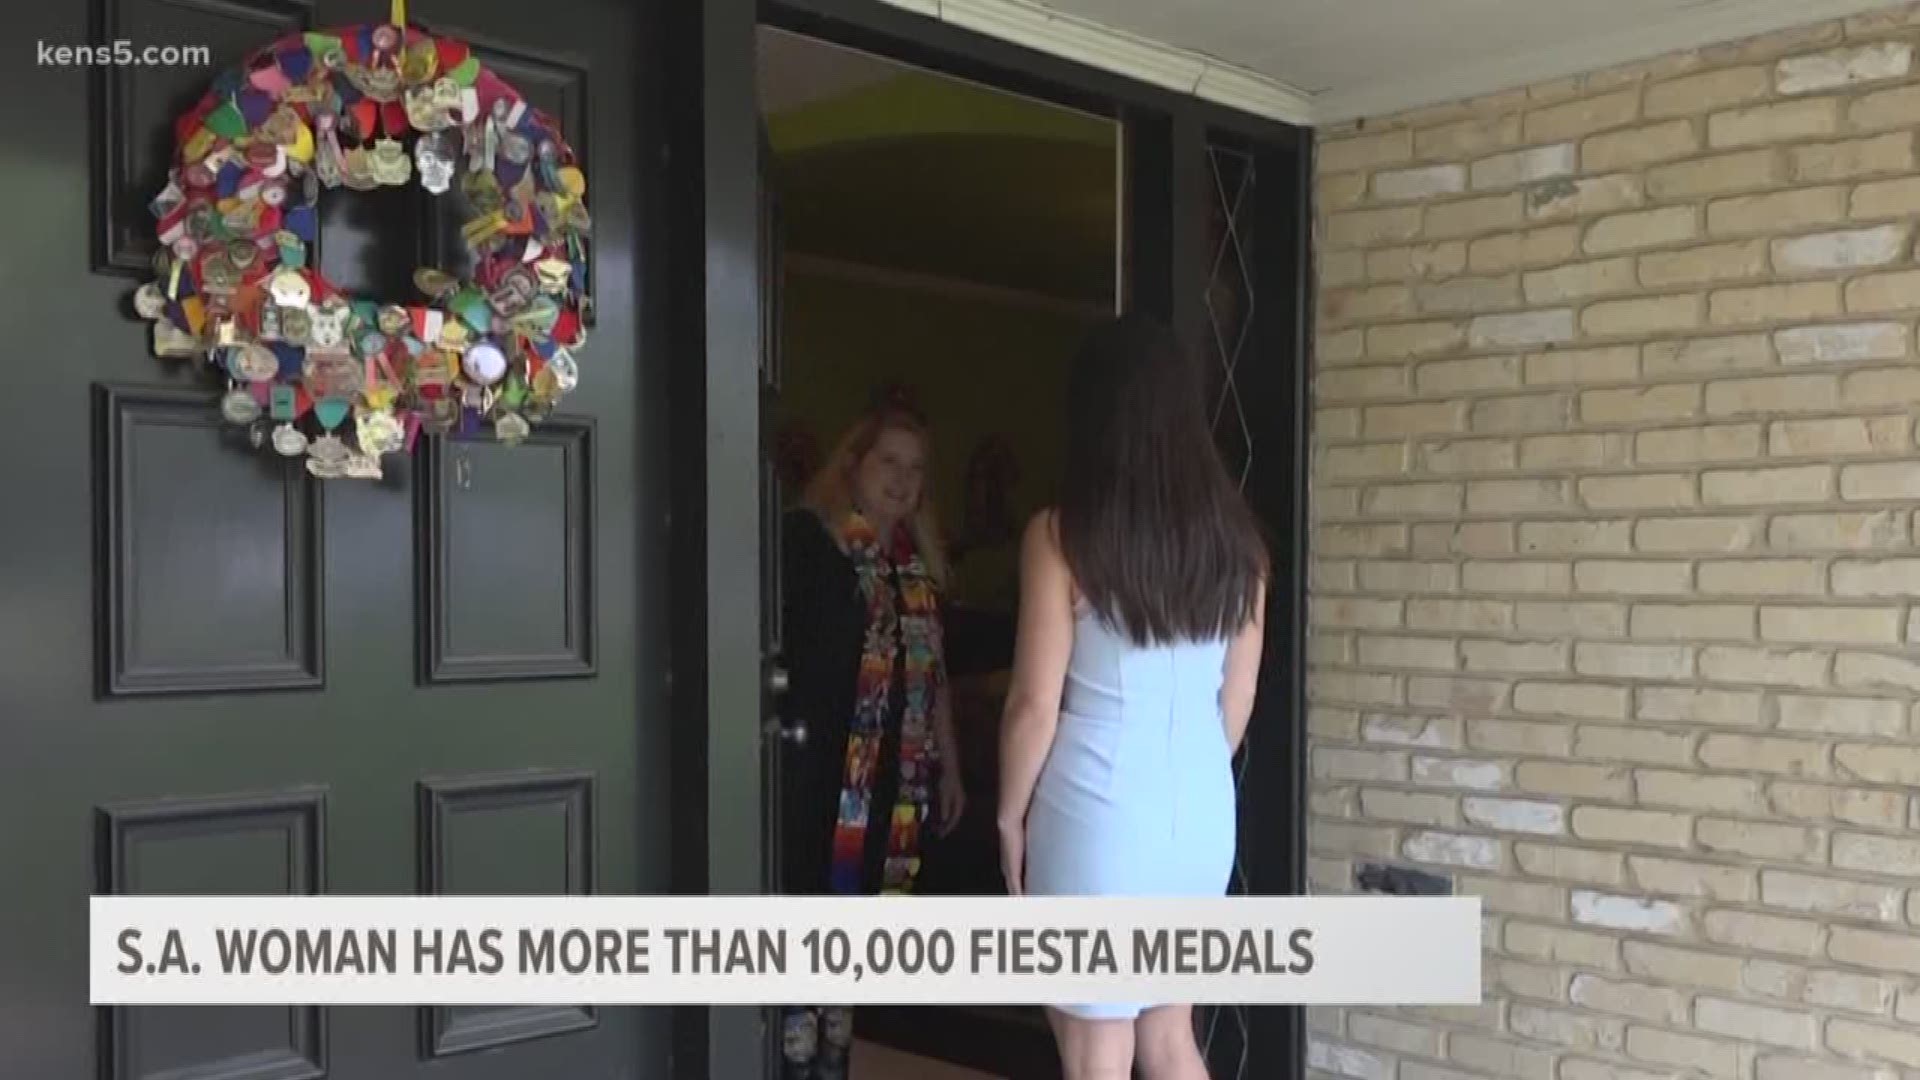 A San Antonio woman collects thousands of Fiesta medals and has won awards for her impressive collection.